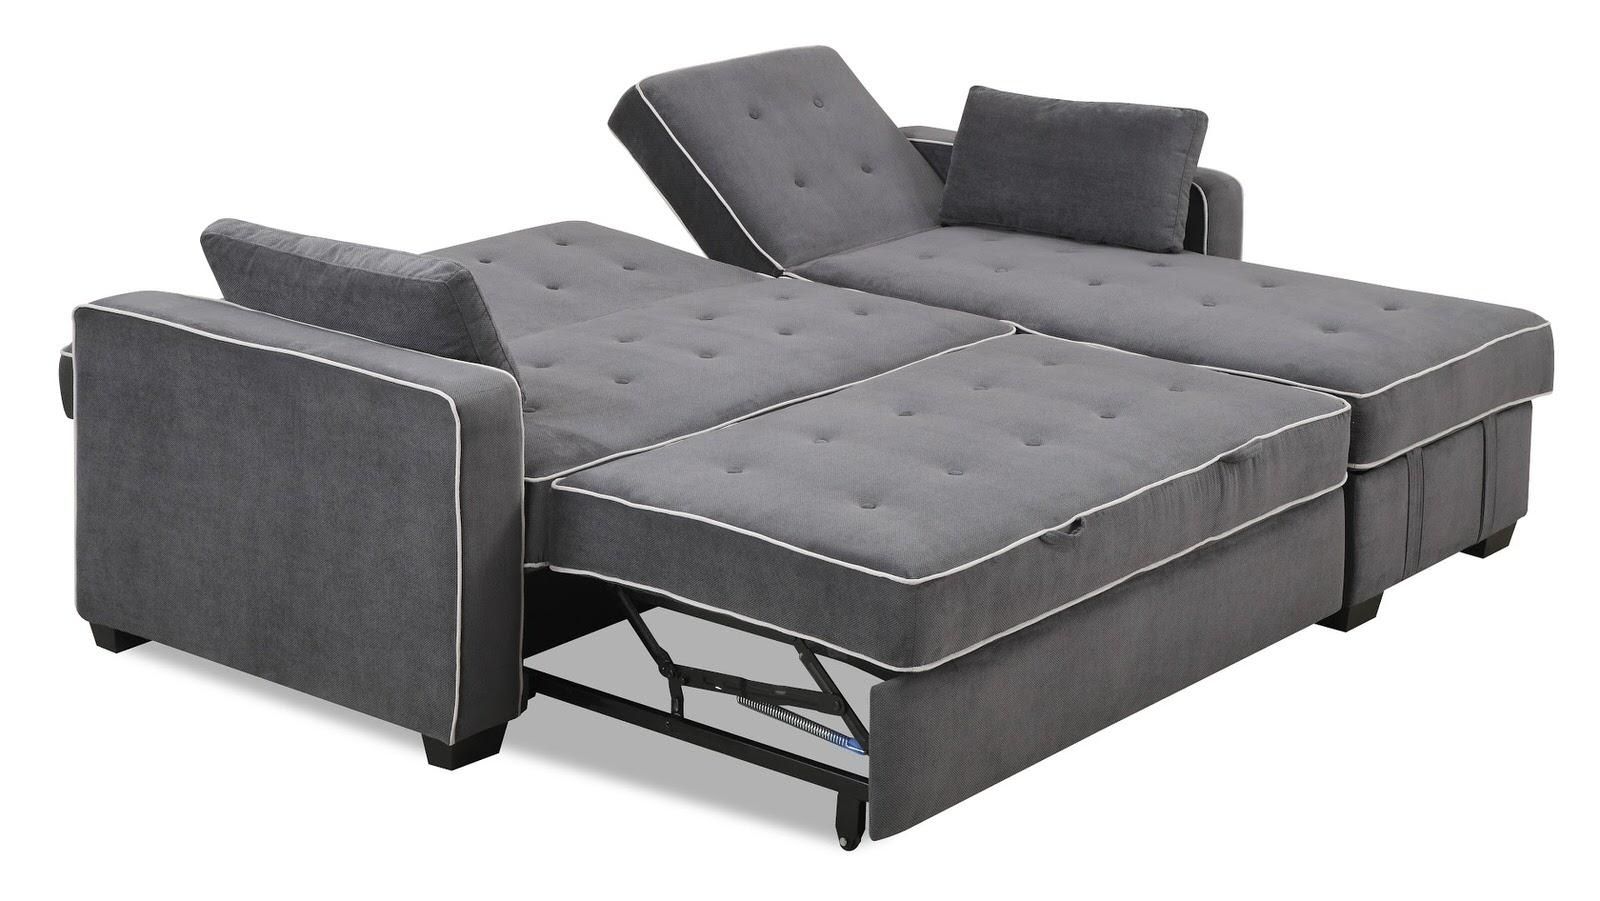 Augustine King Size Sofa Bed Moon Greyserta / Lifestyle Throughout King Size Sofa Beds (View 1 of 20)